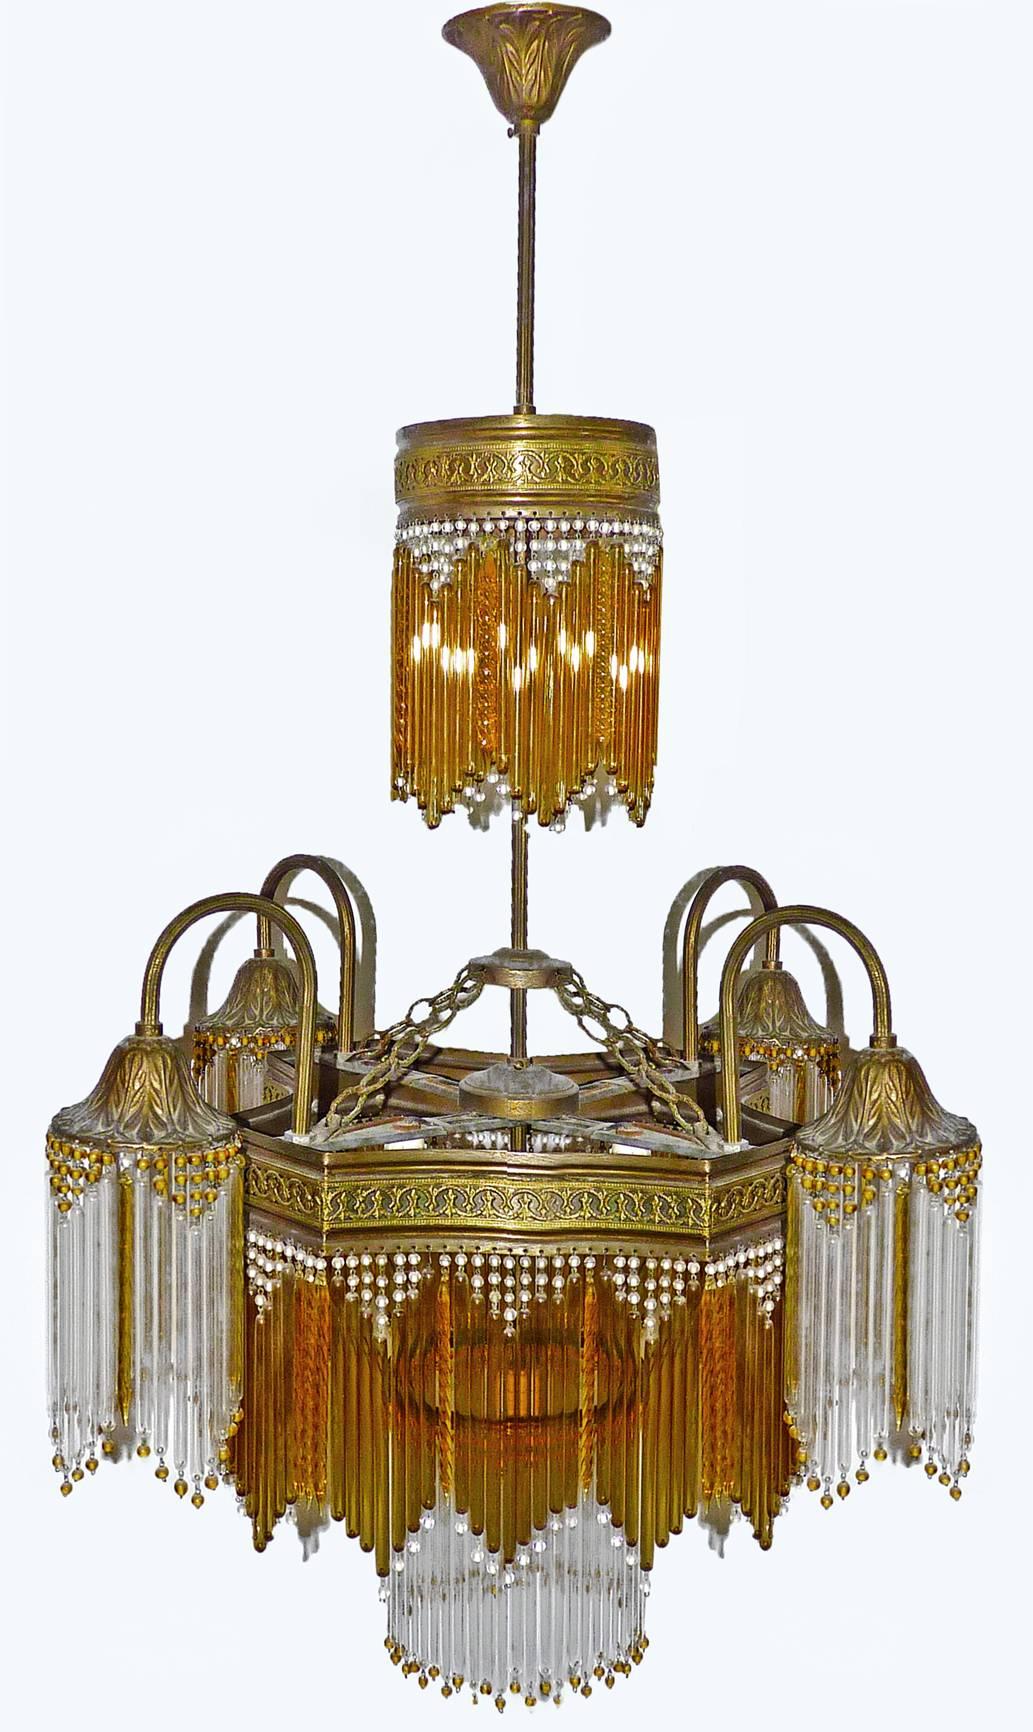 Fabulous midcentury chandelier in clear and amber glass and beads and amber crystal.
Measures: Diameter 24 in/ 60 cm
Height 36 in/ 90 cm
Weight: 5 lb/ 4 Kg
Nine light bulbs E14/ Good working condition.
Age patina.
Assembly required. Bulbs not